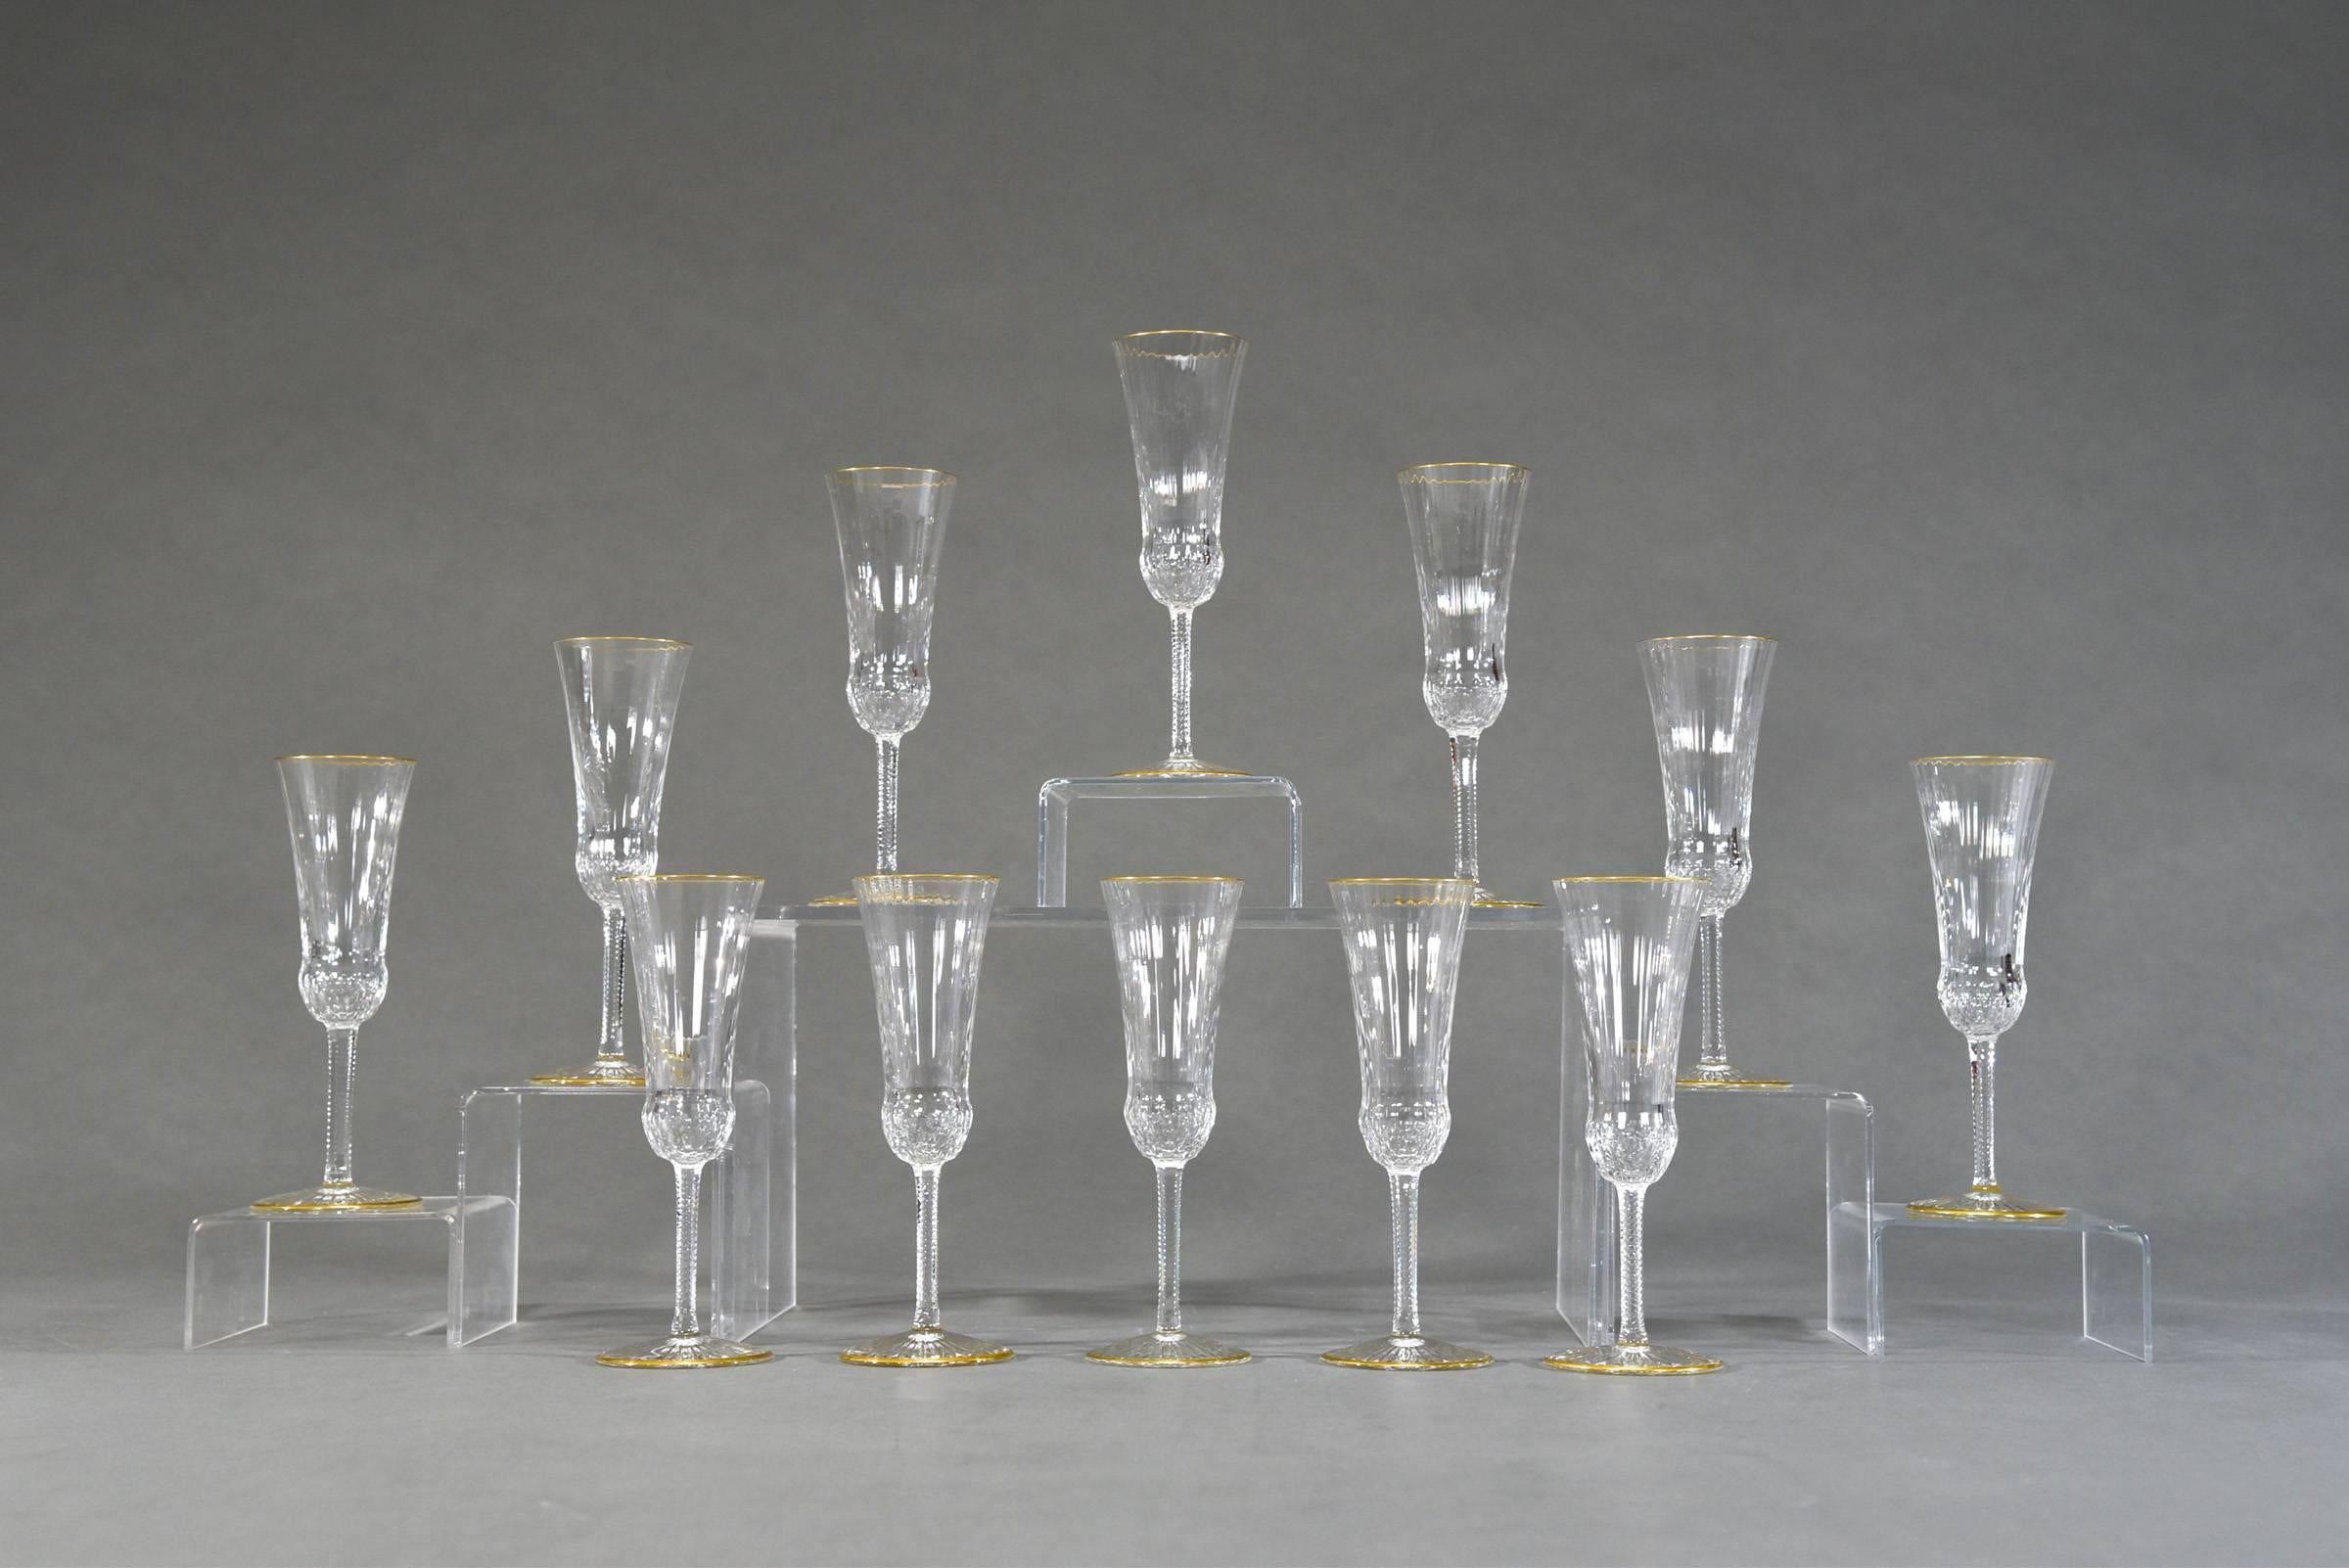 These are the classic, iconic champagne flutes made by St. Louis in a perfect set of 12. The subtle ribbed design is highlighted in gold and these are in excellent condition-ready for you next bottle of champagne!
   